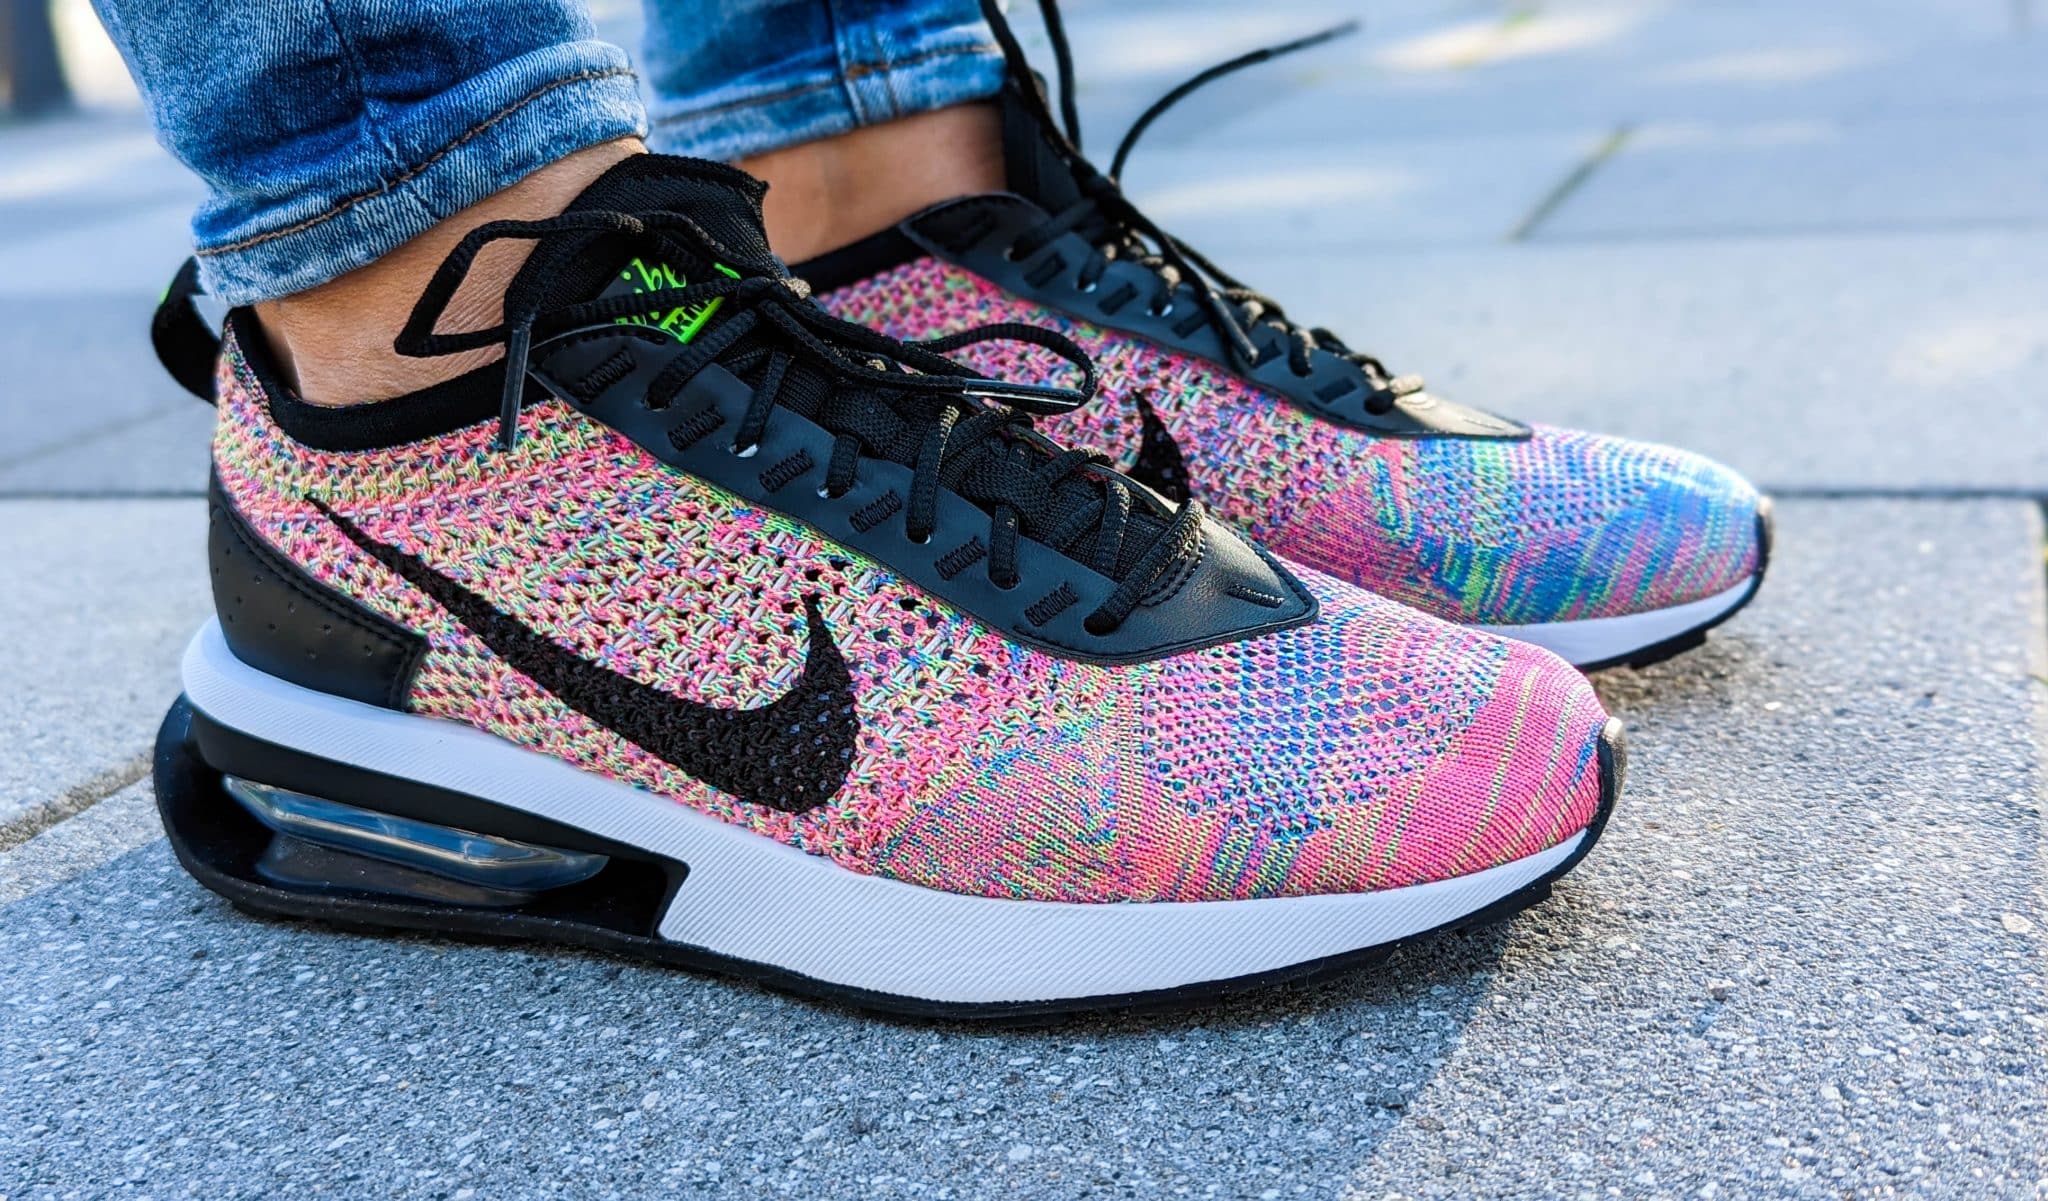 Nike Air Max Flyknit Racer - Multi Colour - Review & On Feet (5